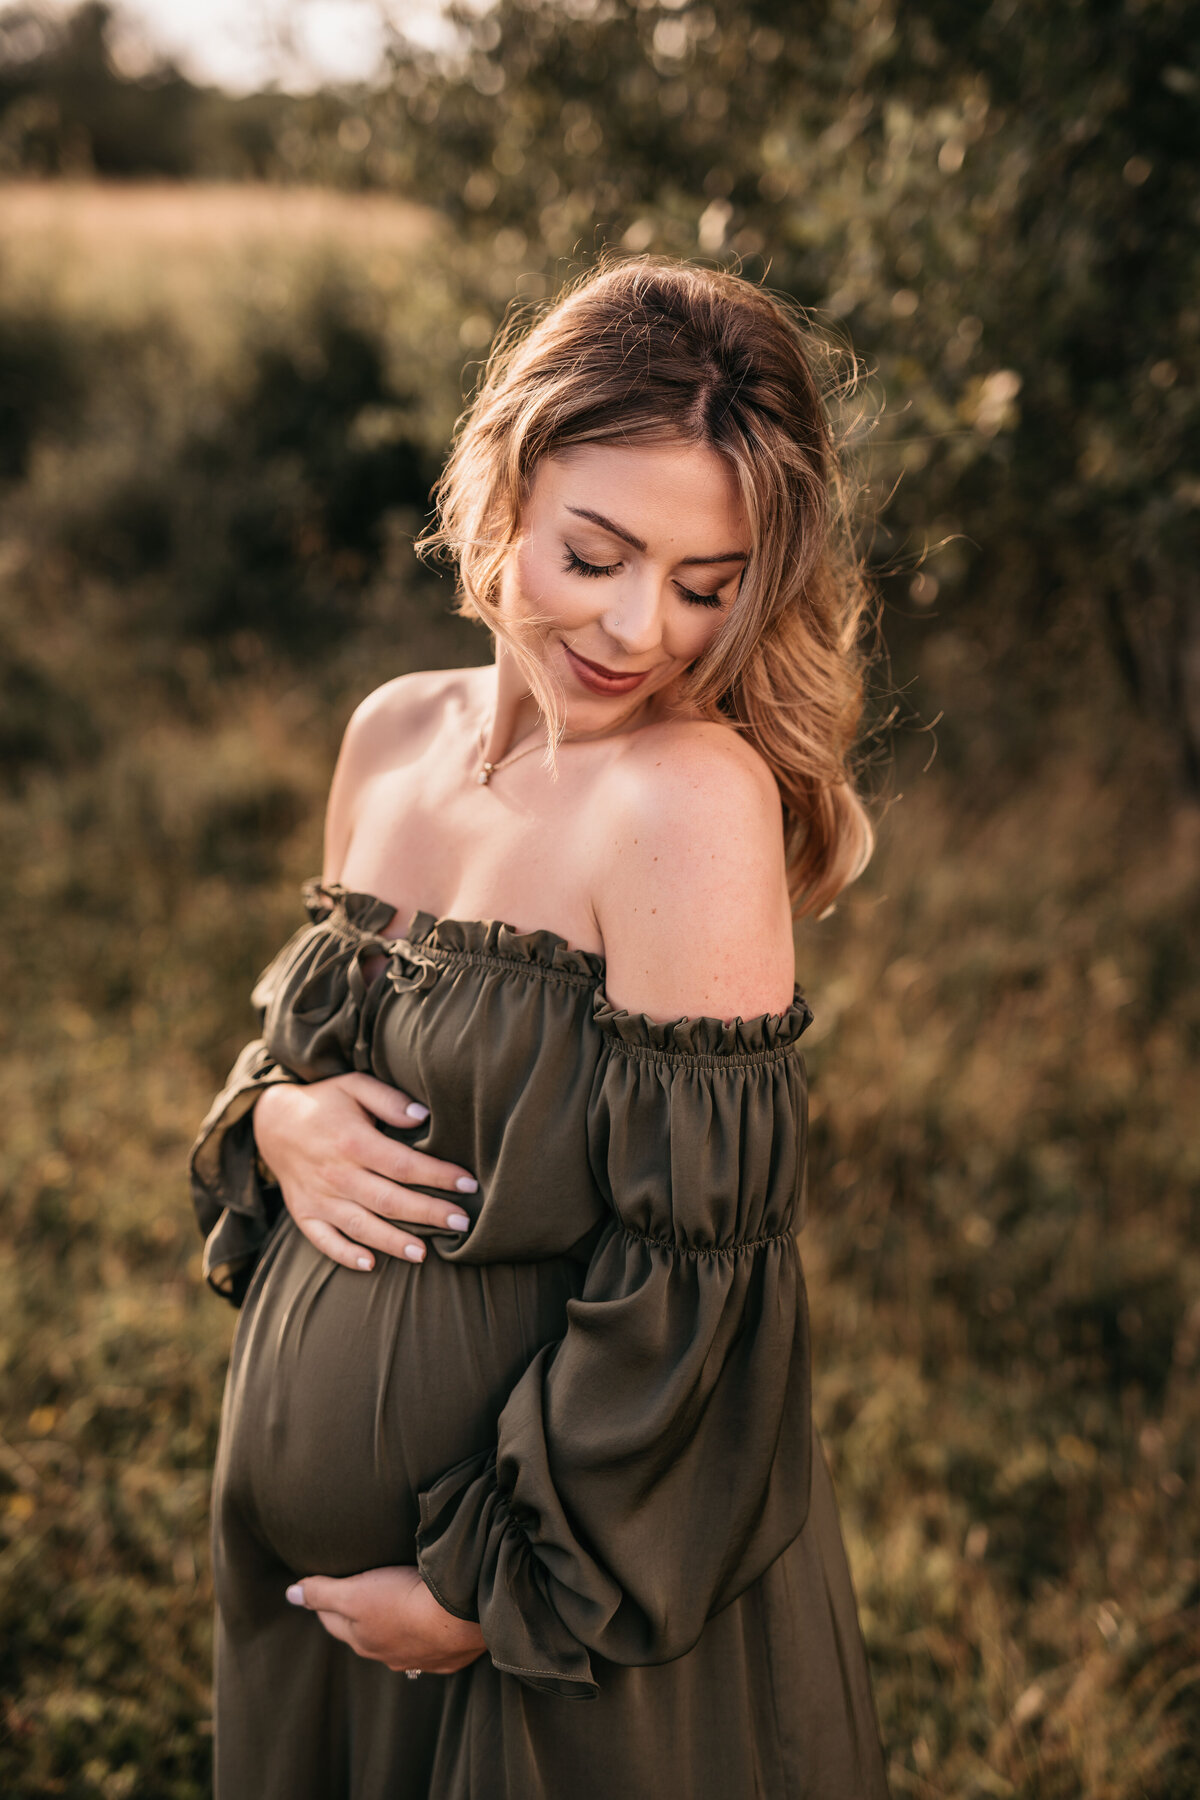 Photo of a pregnant woman in a green dress outdoors at sunset